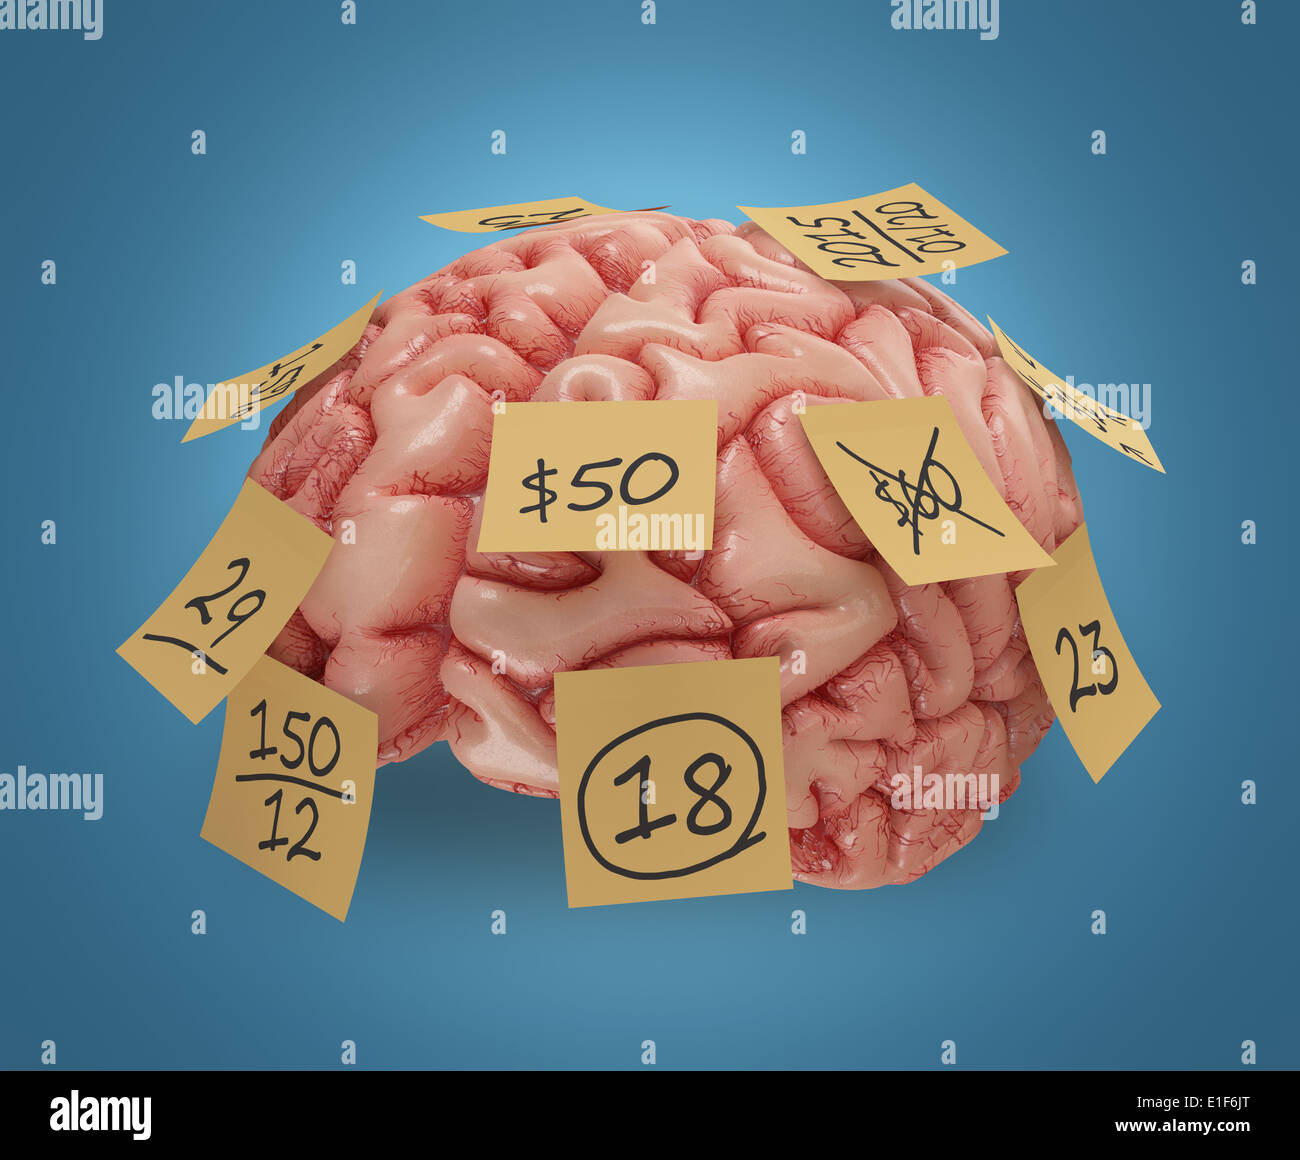 Human brain with yellow sticky notes attached. Concept of good or bad memory. Clipping path included. Stock Photo